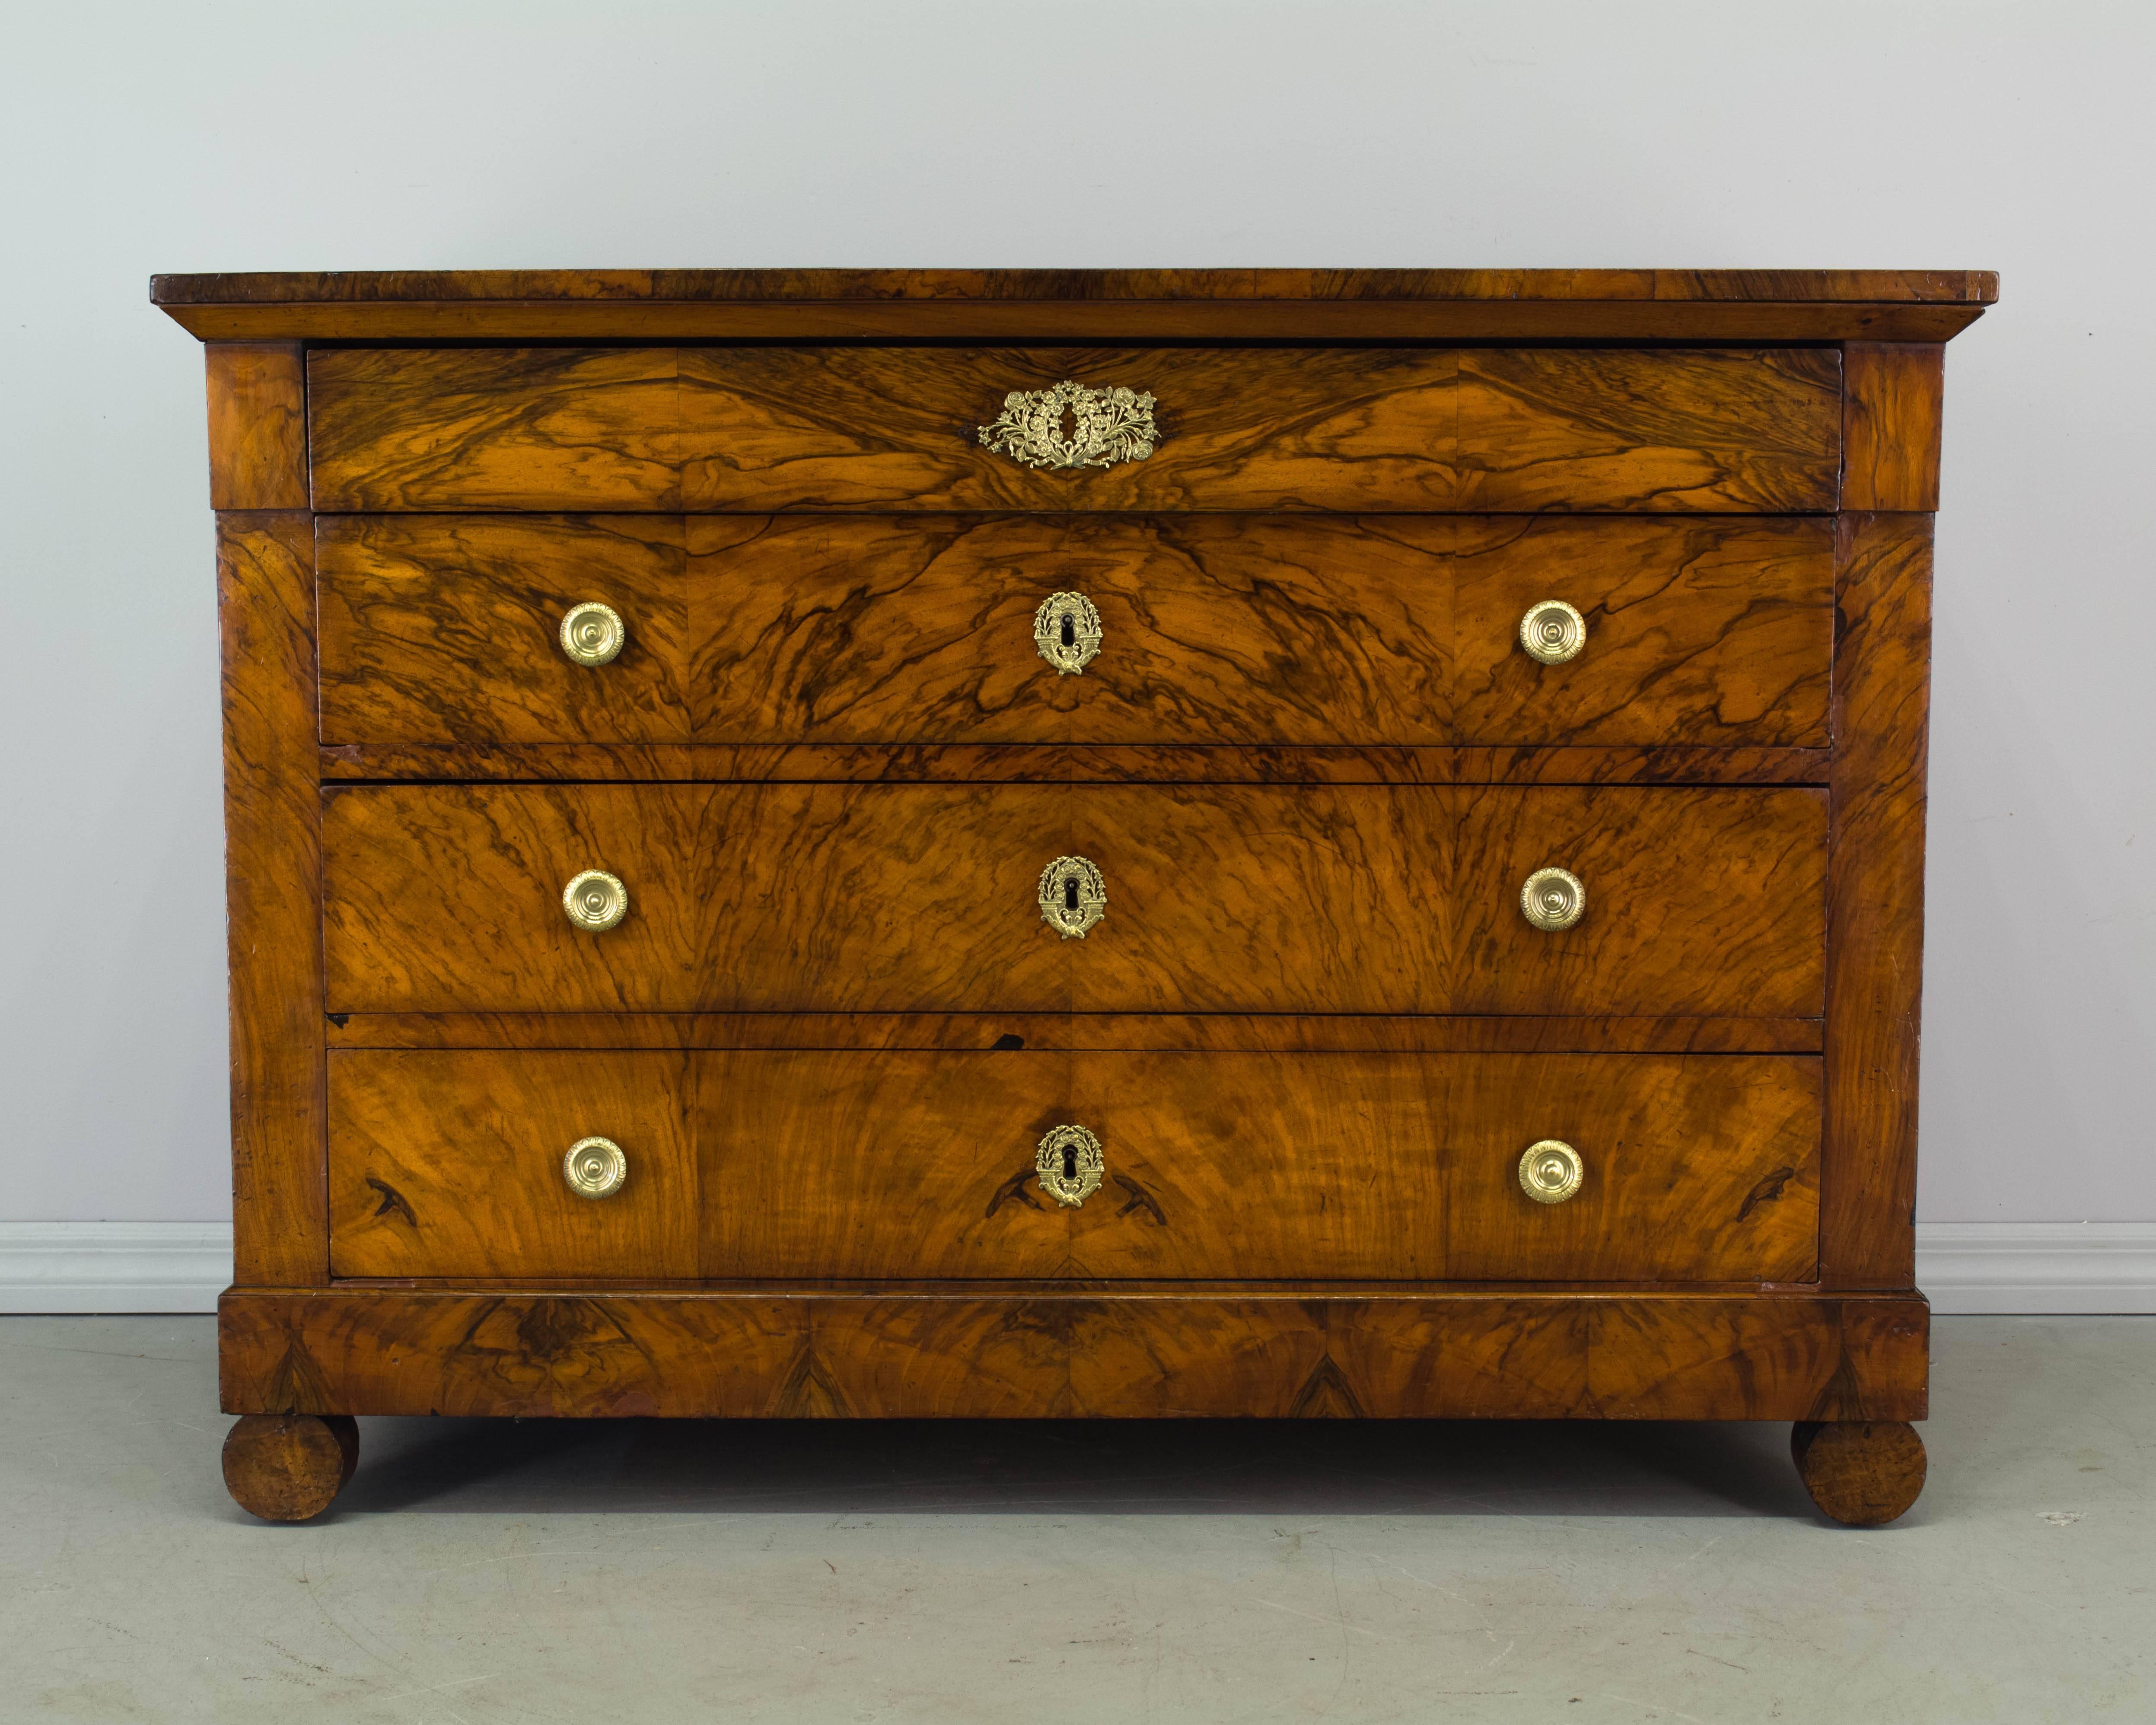 A fine 19th century Restauration Period commode with beautifully patterned bookmatched veneer of walnut on front, sides and top. Four dovetailed drawers provide ample storage. French polish finish. Oak as a secondary wood. Locks are present, but